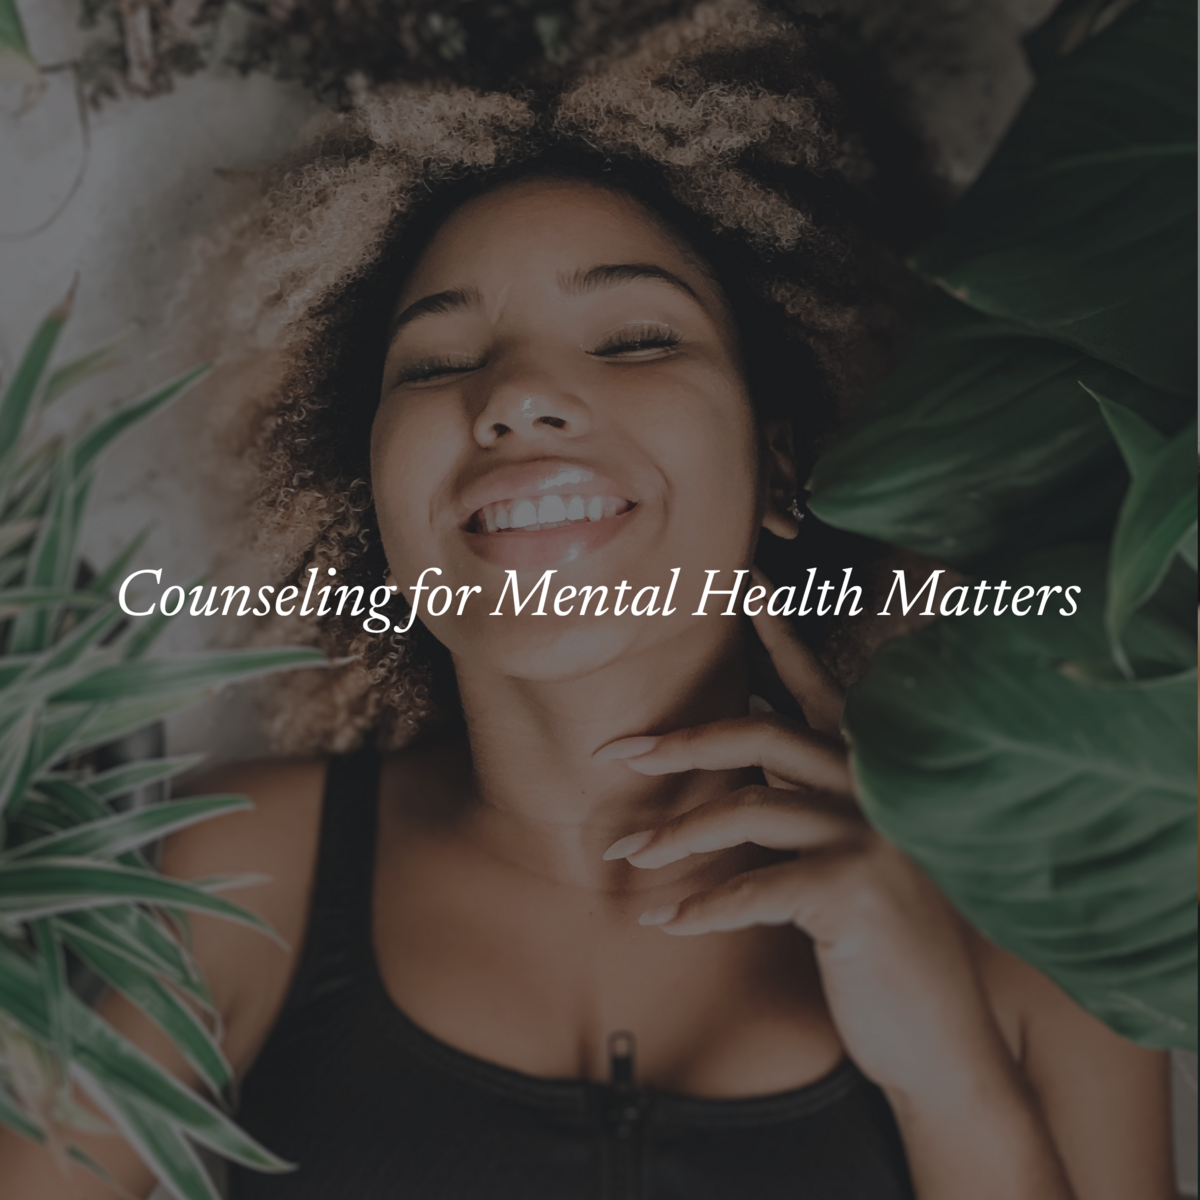 COUNSELING FOR MENTAL HEALTH MATTERS@2x